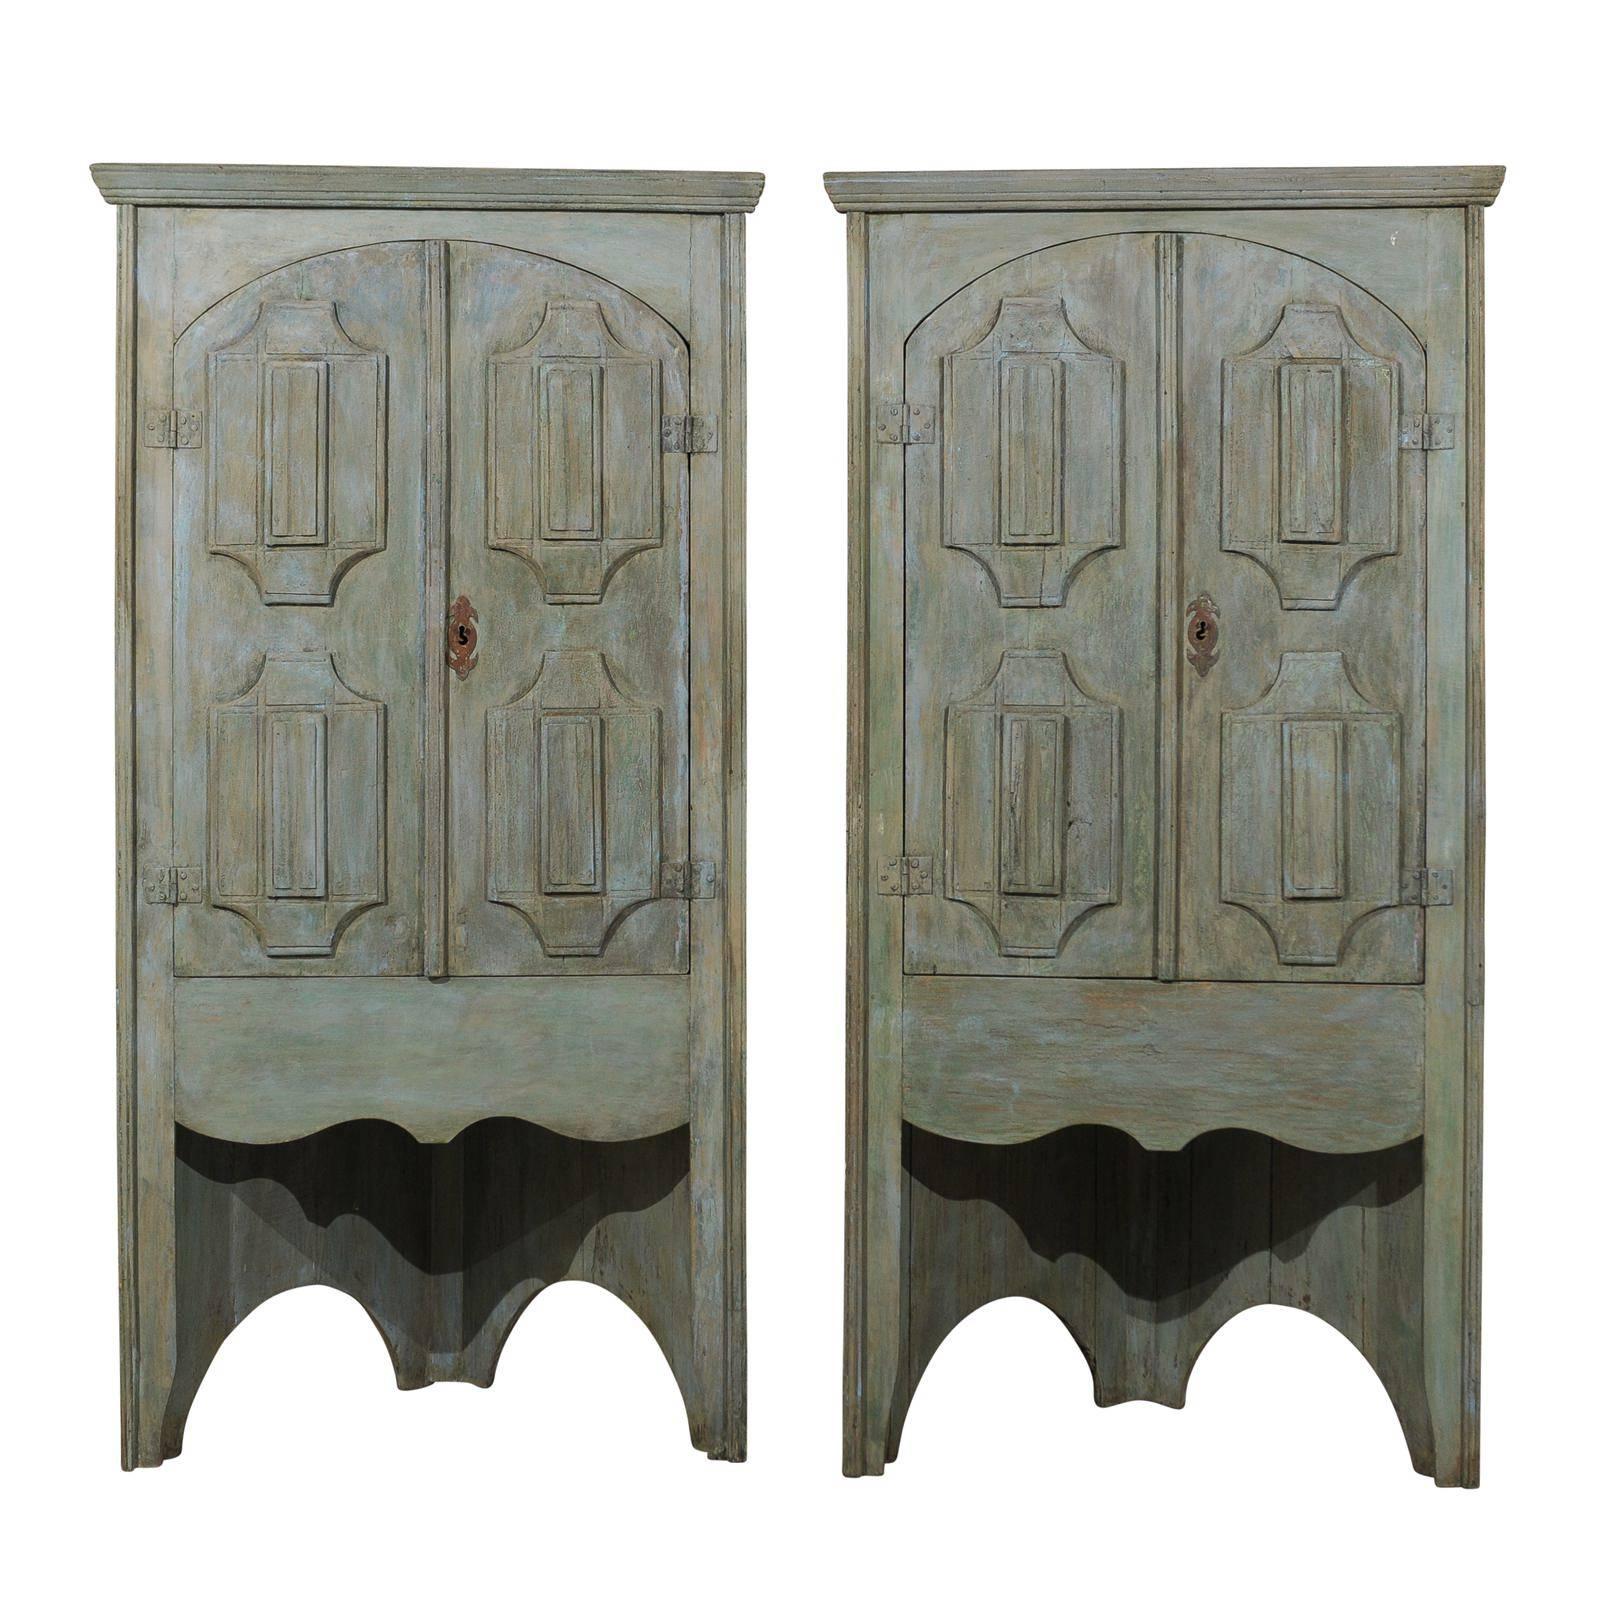 Pair of 19th C. Painted 7.5 ft Tall Wood Corner Cabinets w/Open Space Beneath